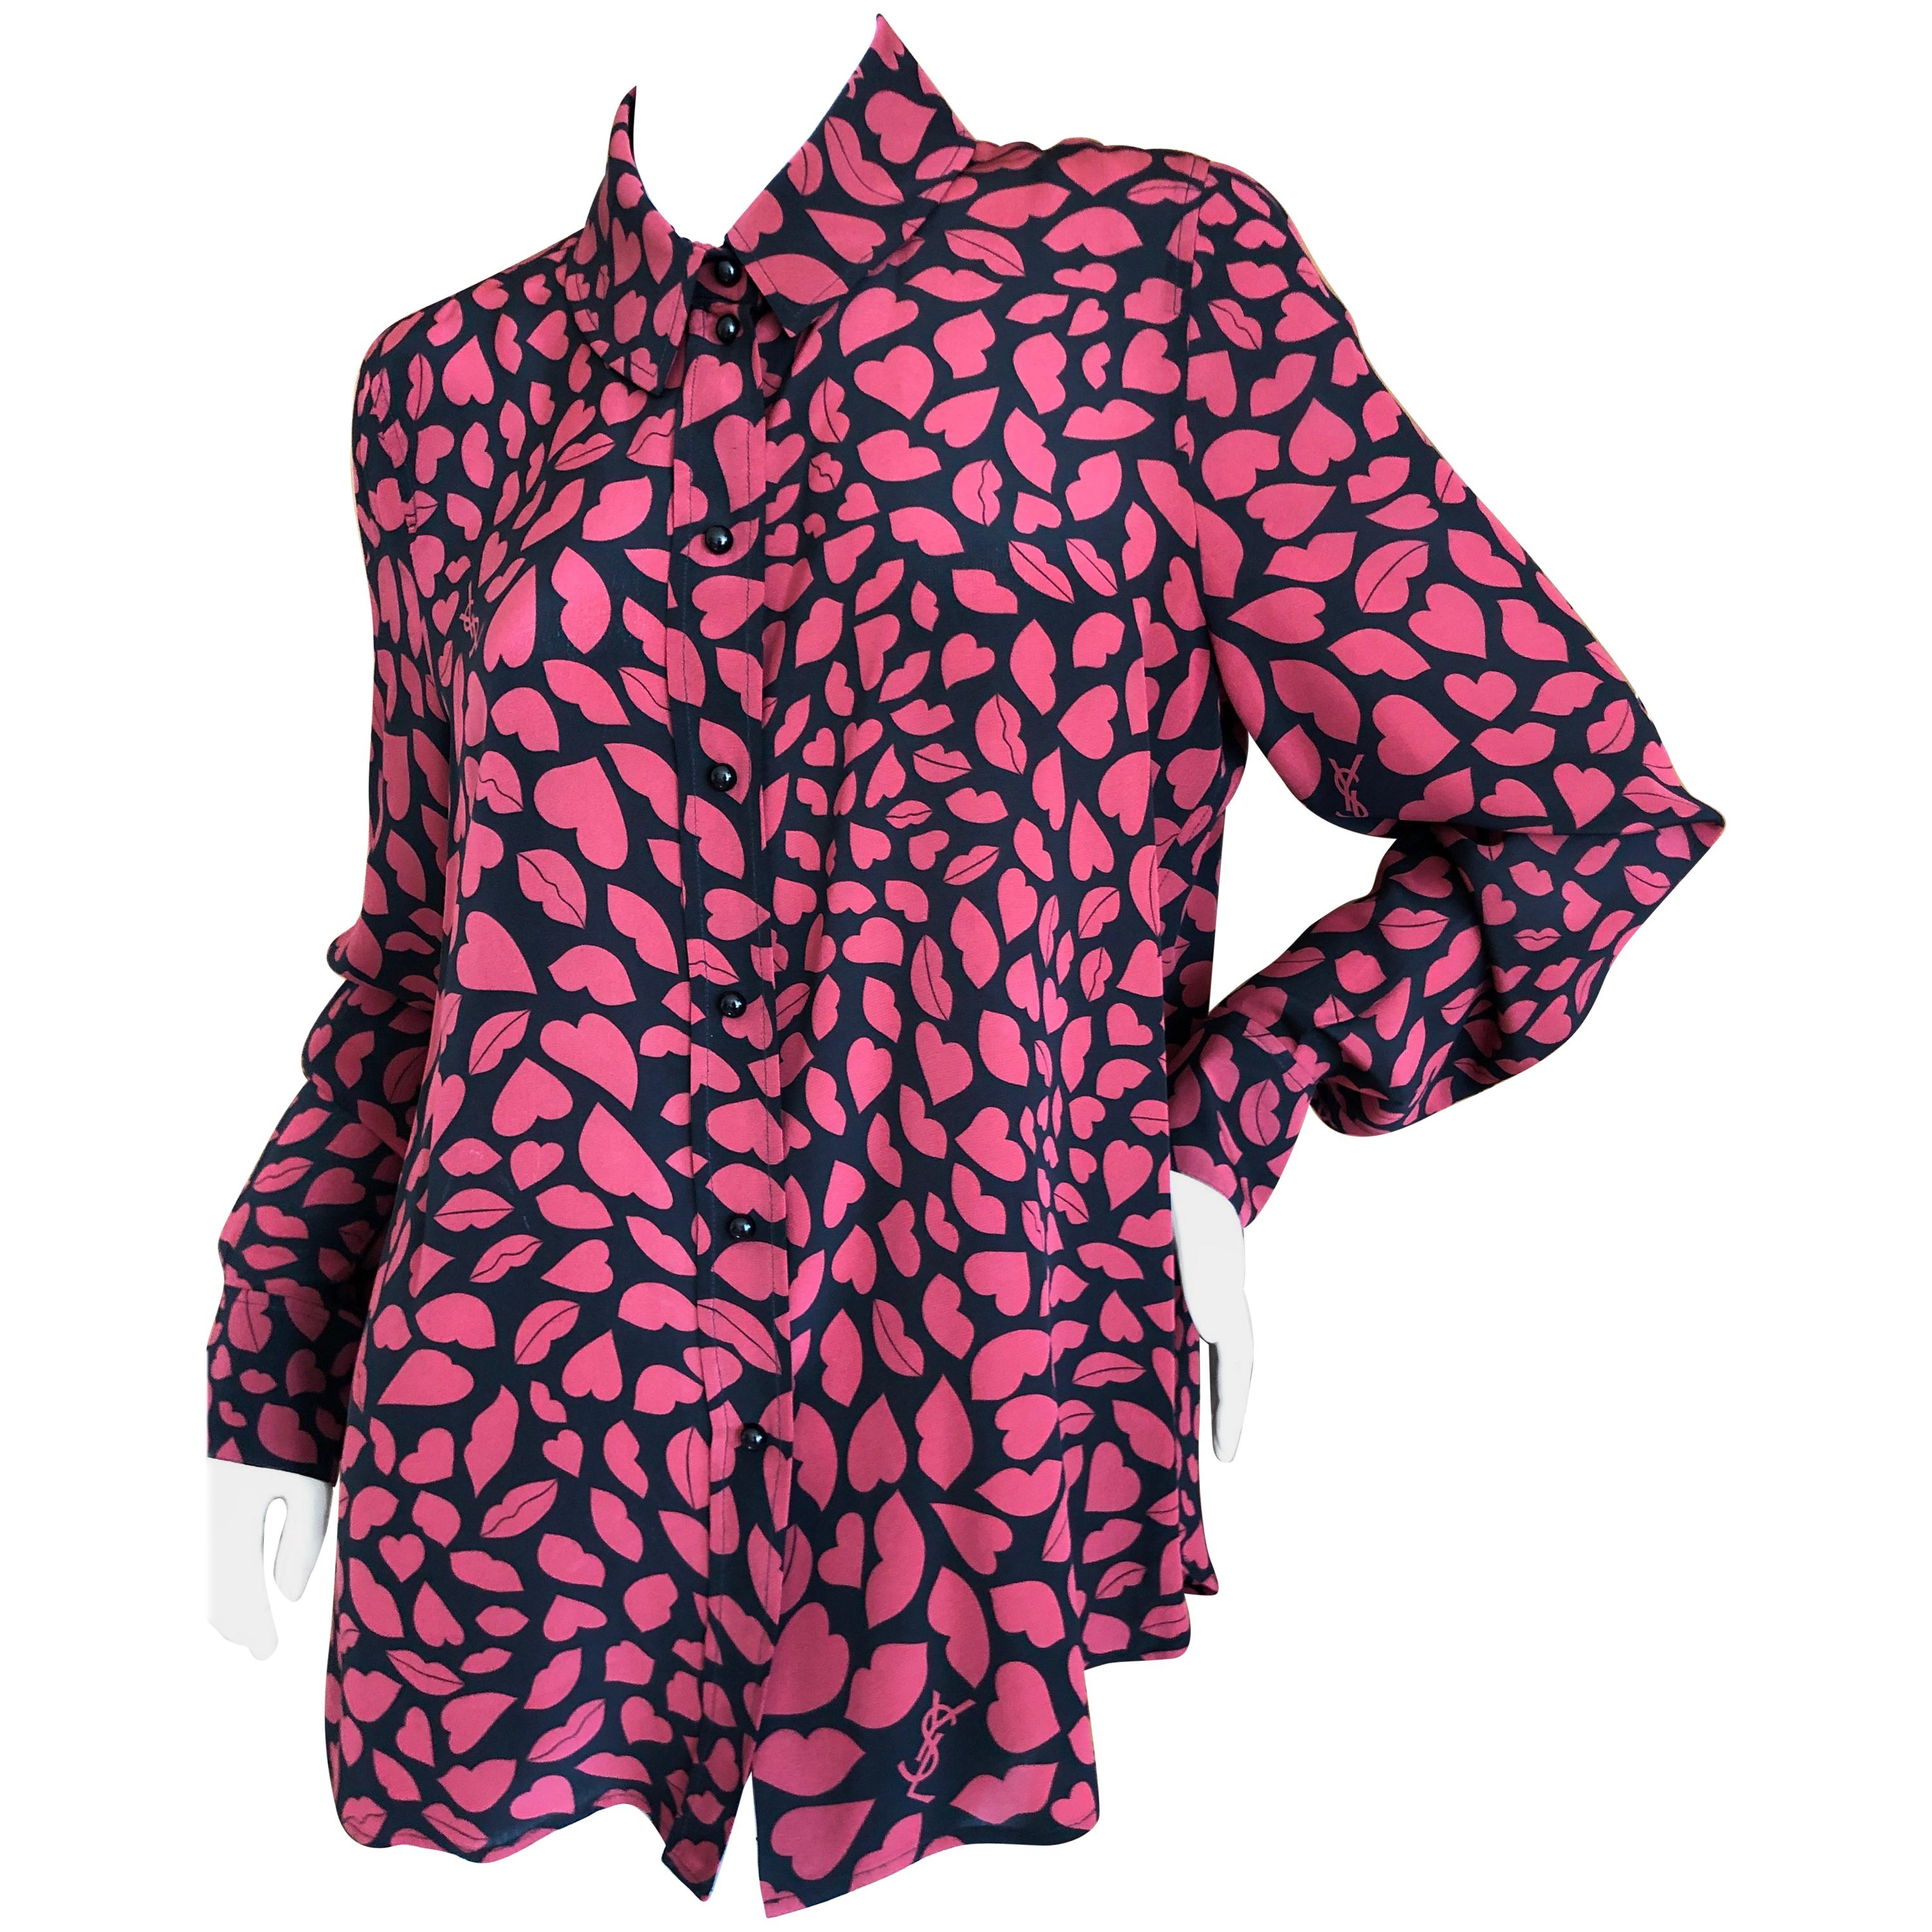 Yves Saint Laurent Vintage Heart and Lips Print Snap Front Blouse Size Large For Sale